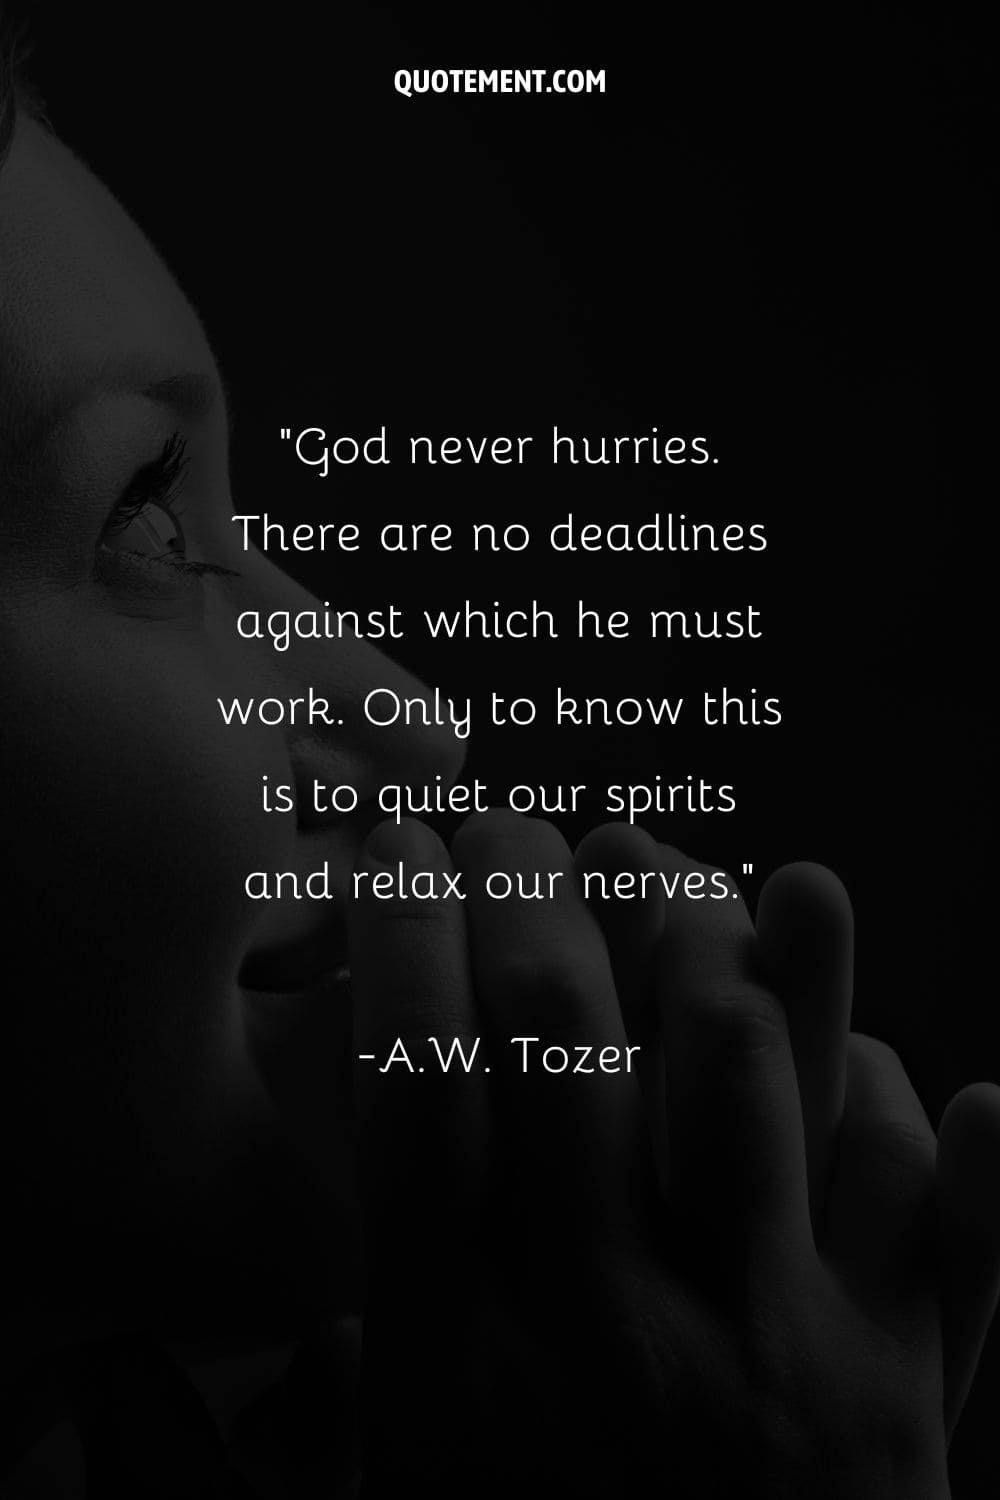 Image of a peaceful person bowed in prayer representing quote on trusting God's timing.